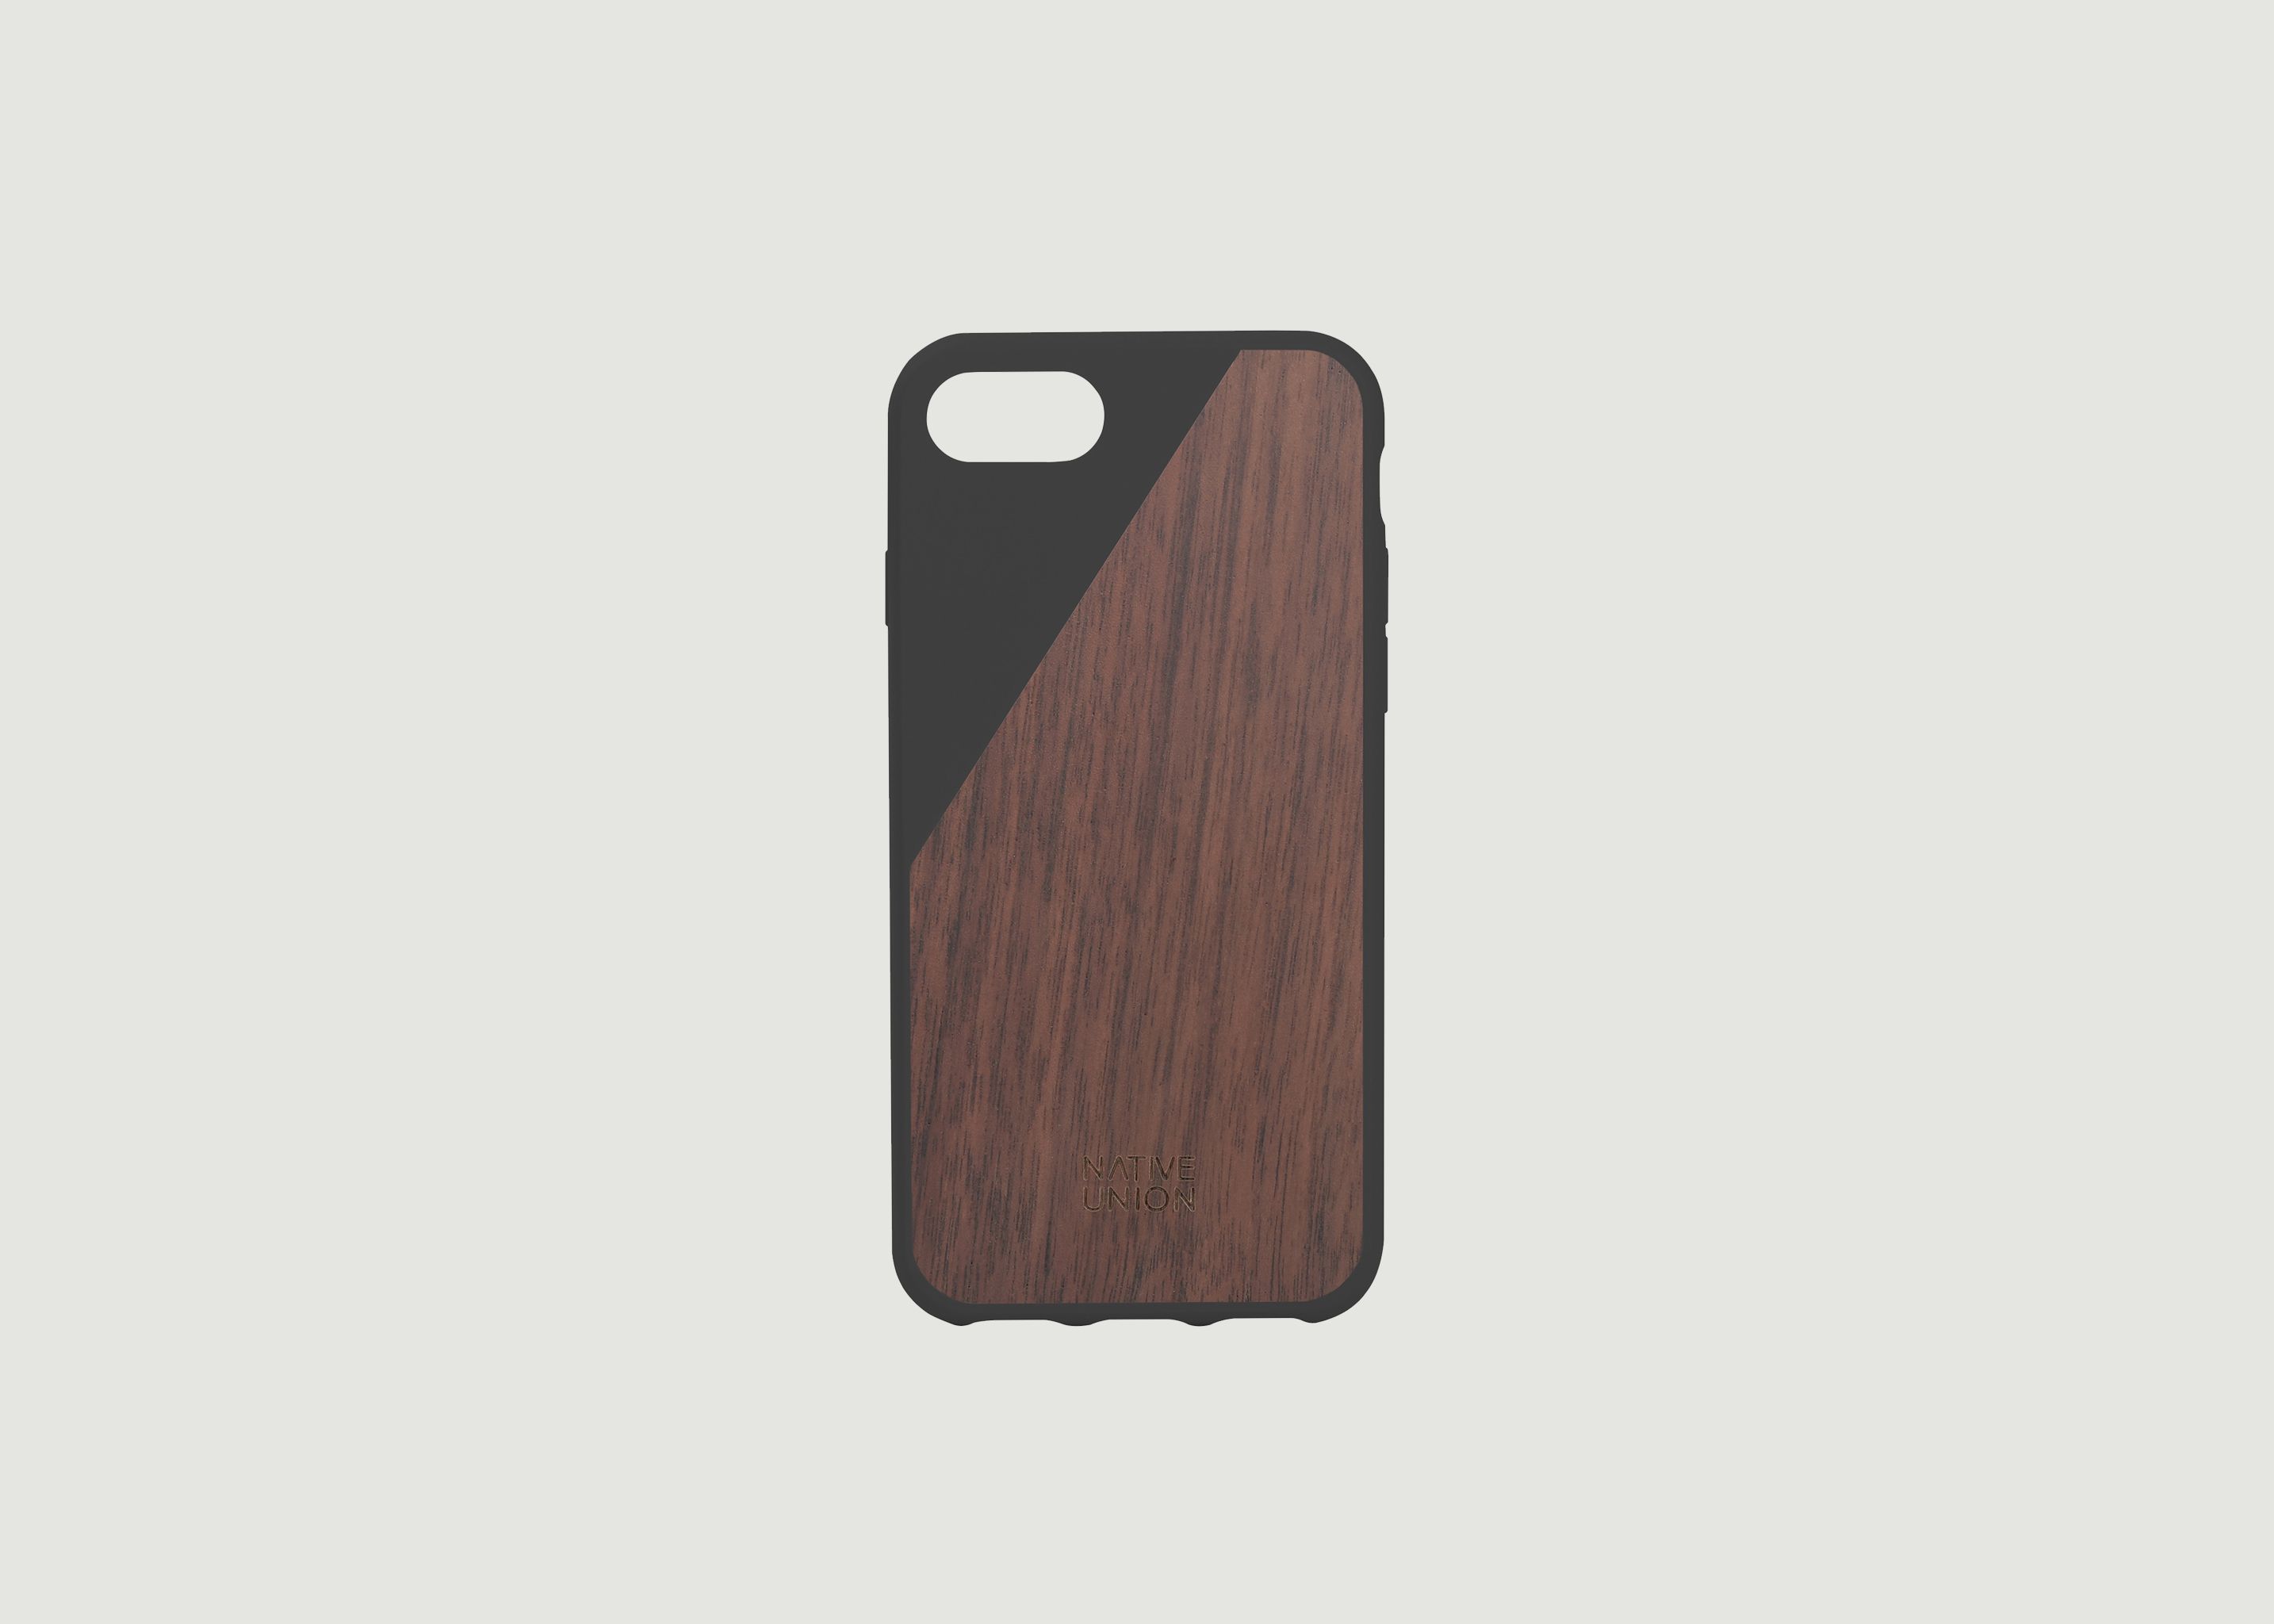 Clic Wooden Iphone 7/8 or iPhone X Case - Native Union